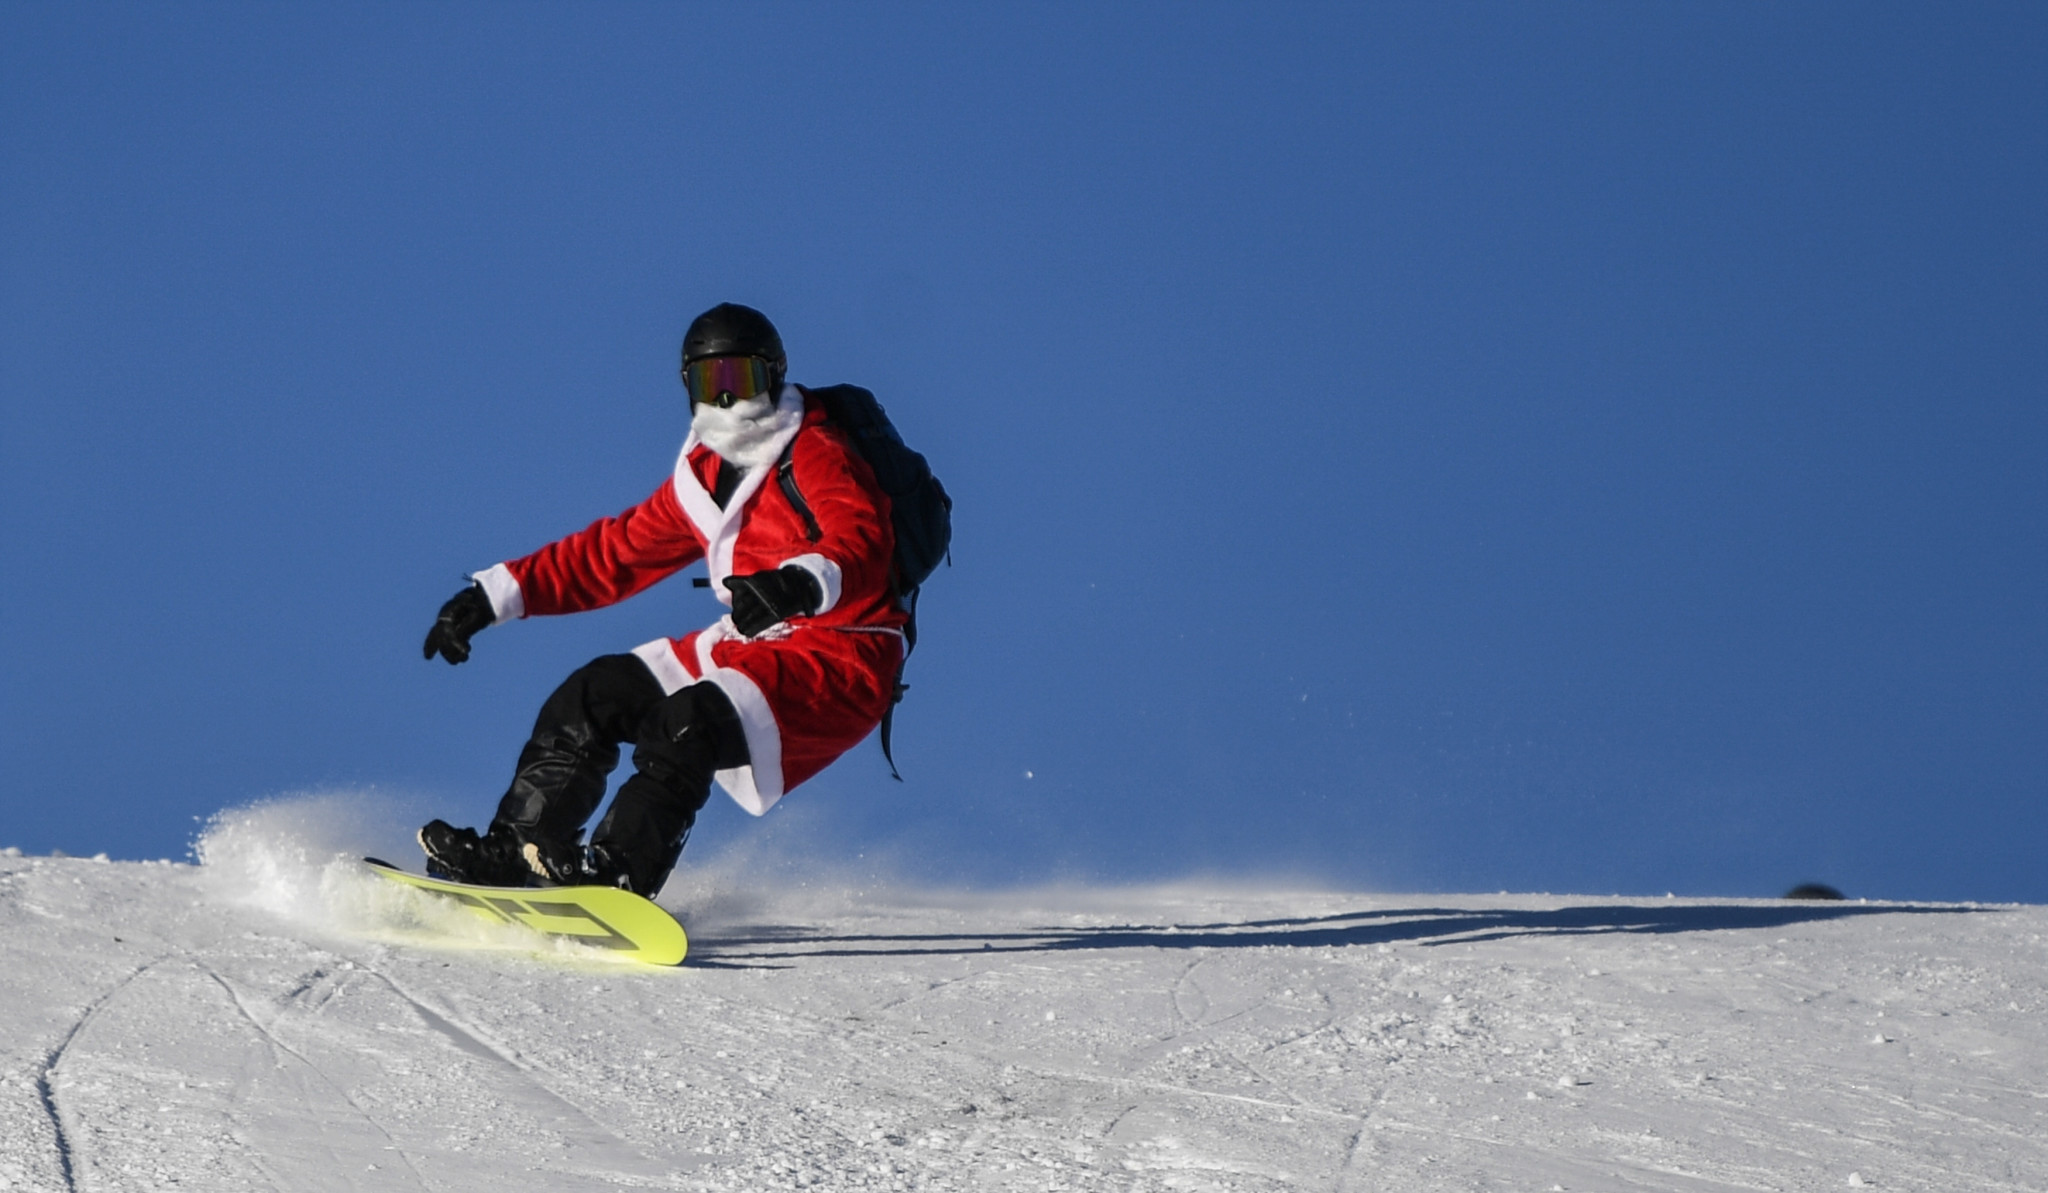 A snowboarder on the slopes in Feldberg ©Getty Images